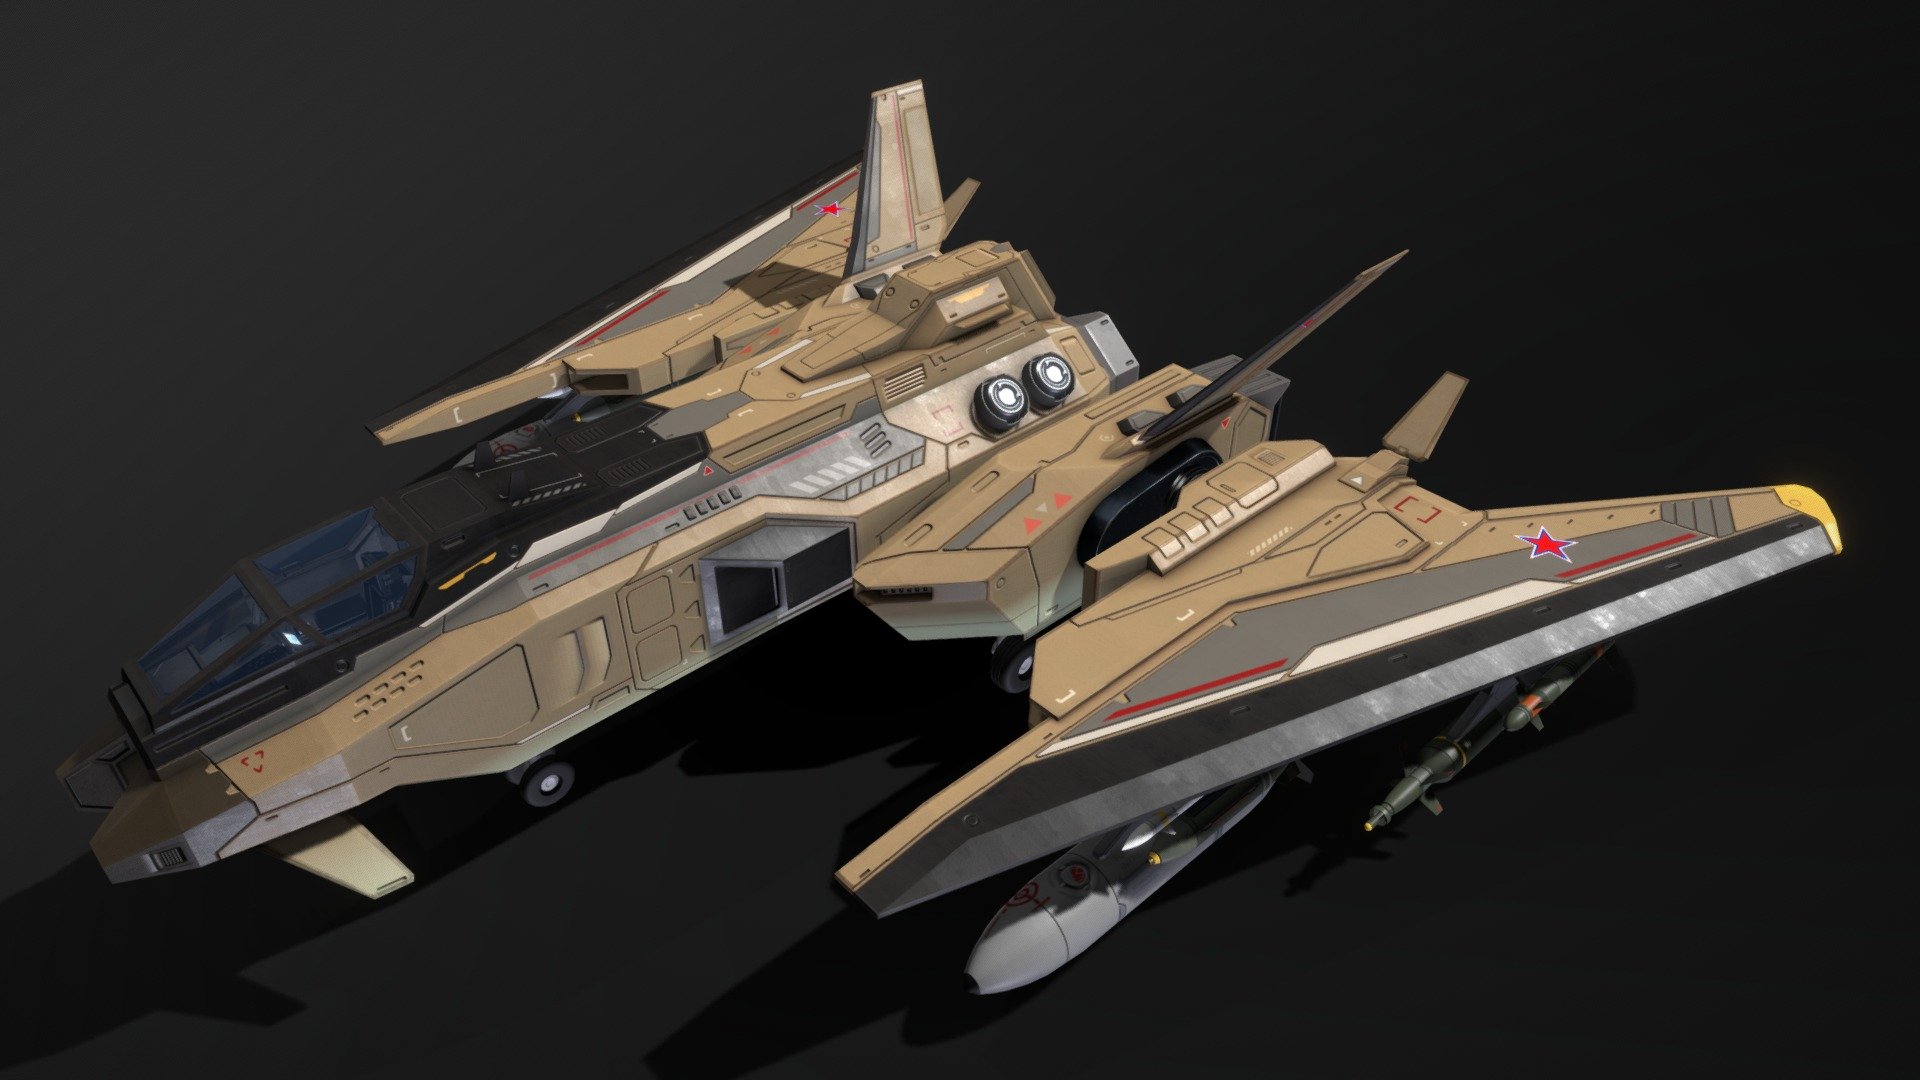 This is a model of a low-poly and game-ready scifi fighter. 

Equipment: 4 missiles, 2 bombs, fuel tank, 3 barrels, minigun, railgun, missile pod. The weapons are separate meshes and can be attached to the fighter.

Features: retractable landing gear, optional wheel or skid landing gear, movable aileron, elevator, rudder, modular cockpit parts, 3 pre-assembled cockpits, cockpits can be changed, cockpit canopy can be opened, transparent and opaque cockpit canopy, 33 decals: national enblems and labels

The model comes with several differently colored texture sets. The PSD file with intact layers is included.

Please note: The textures in the Sketchfab viewer have a reduced resolution to improve Sketchfab loading speed.

If you have bought this model please make sure to download the “additional file”.  It contains FBX and OBJ meshes, full resolution textures and the source PSDs with intact layers. The meshes are separate and can be animated (e.g. firing animations for gun barrels, etc) 3d model